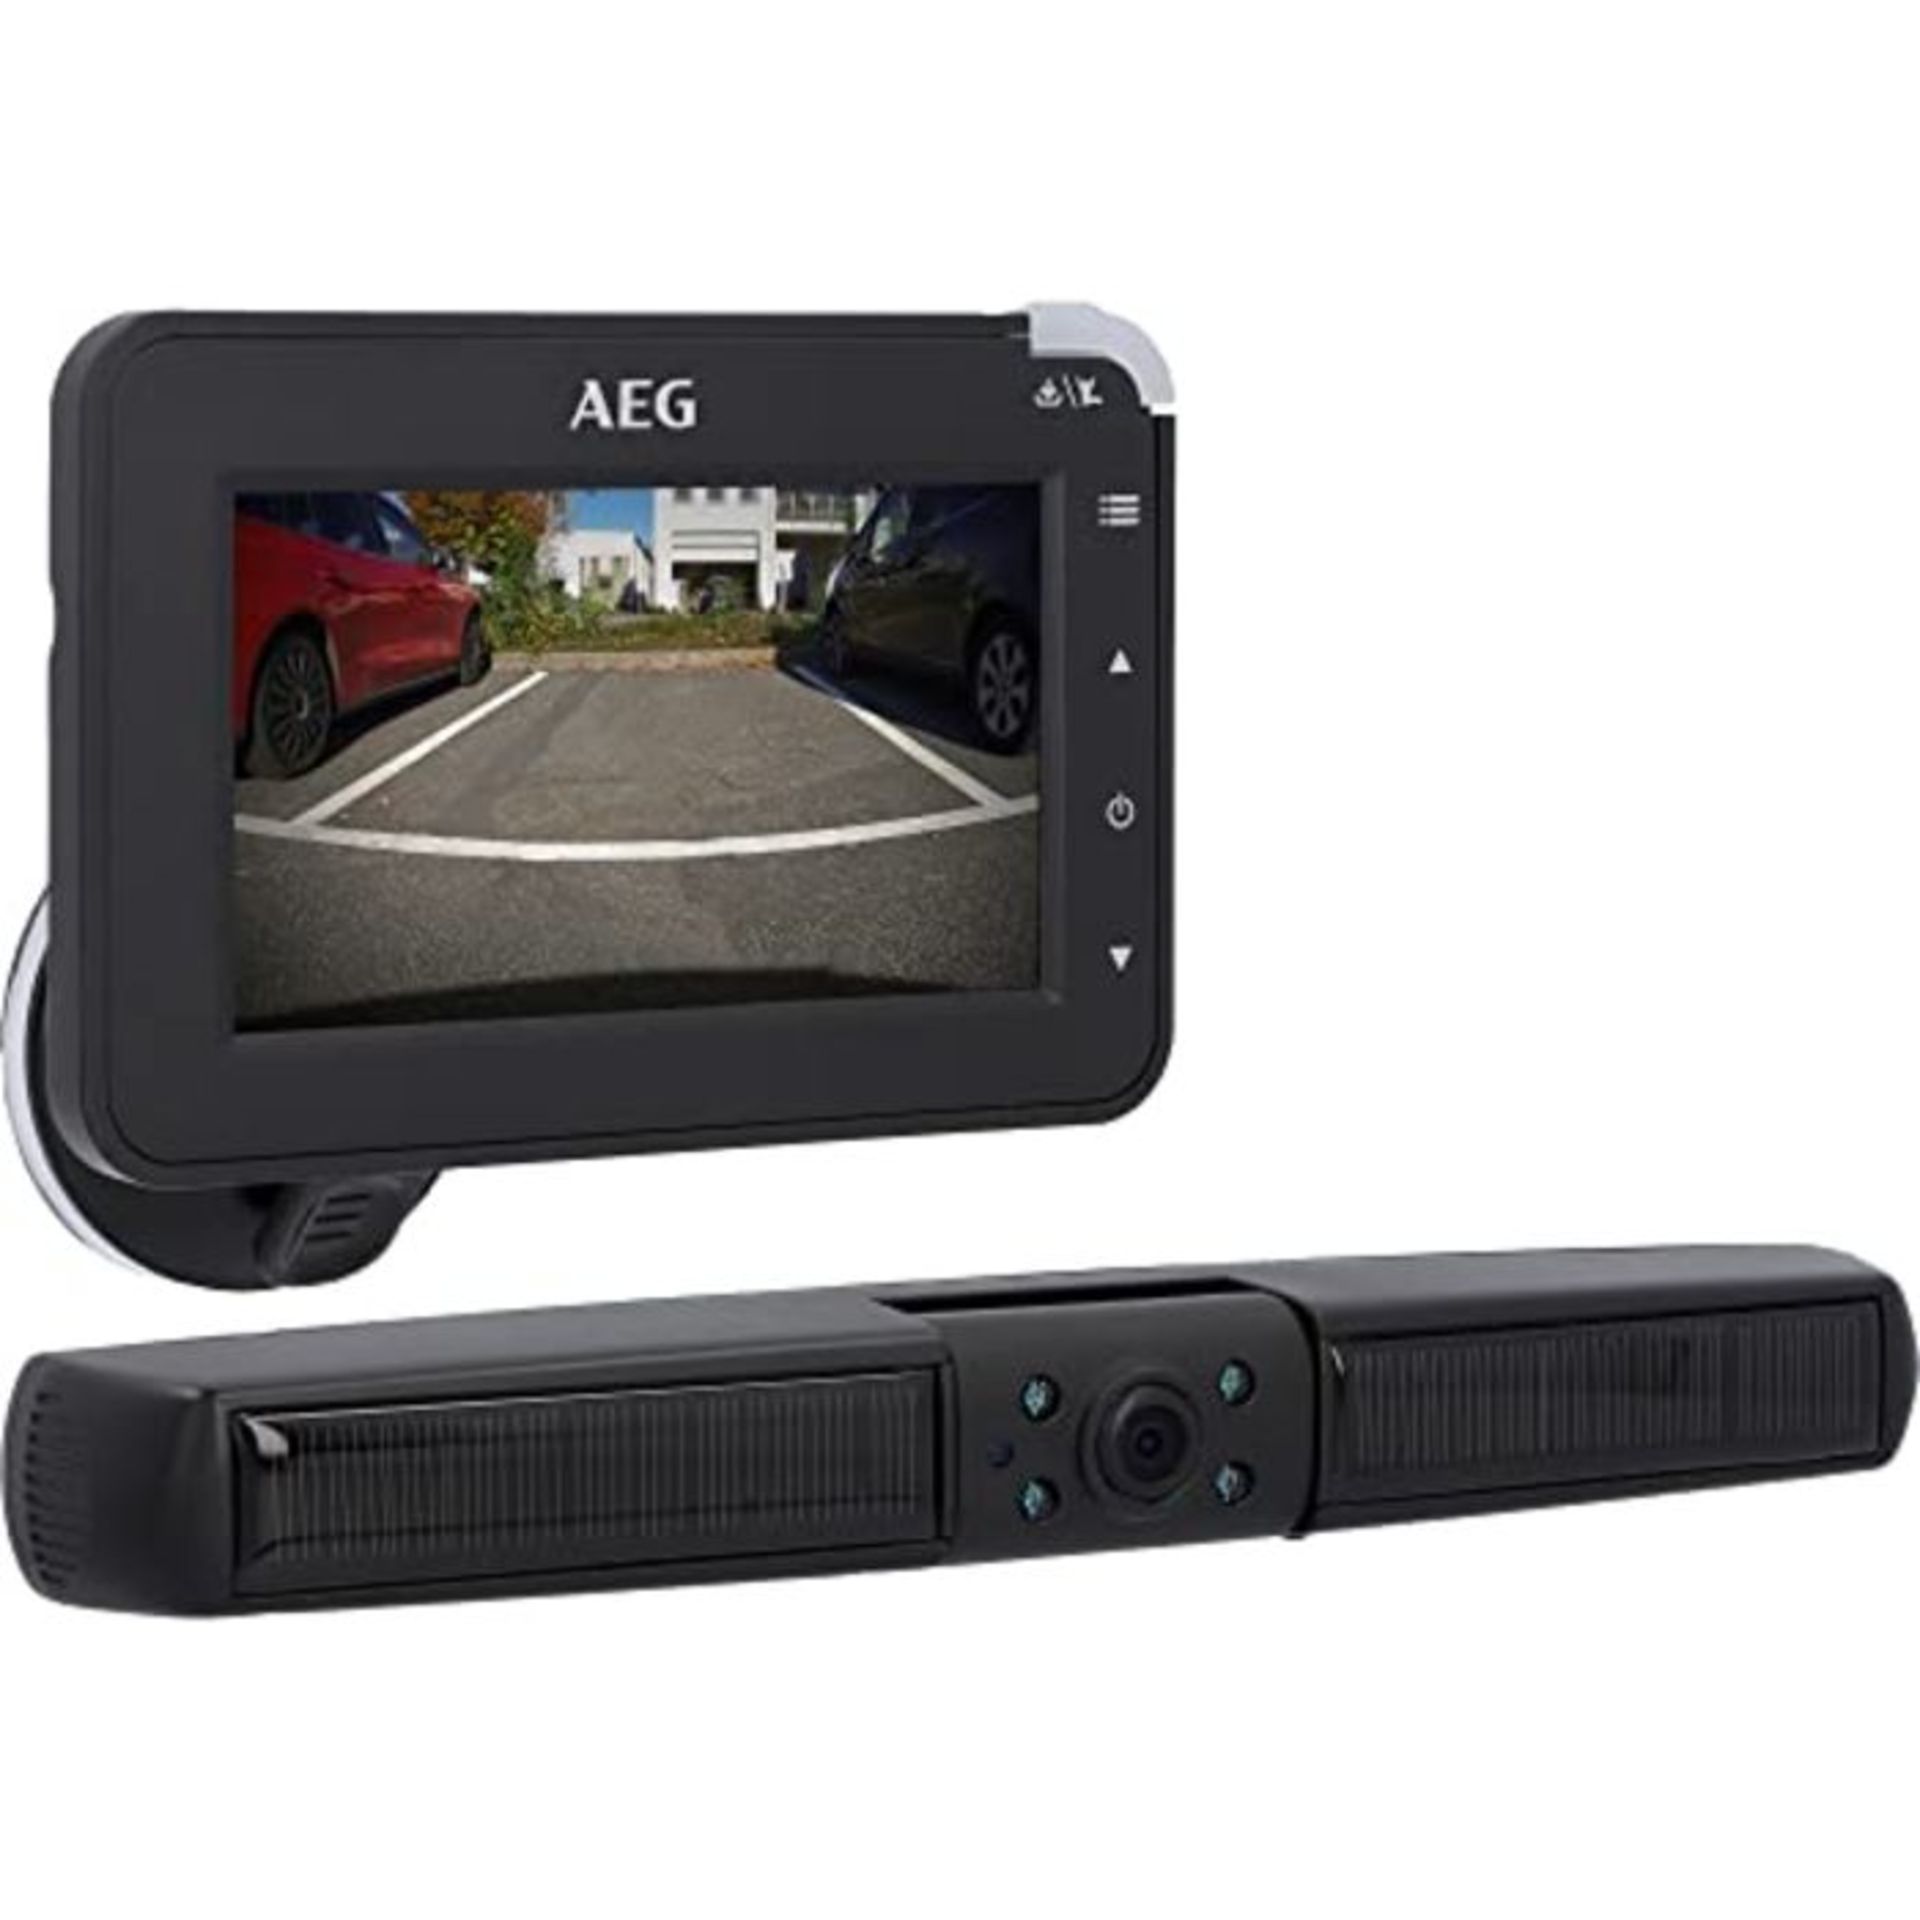 RRP £99.00 [INCOMPLETE] AEG Solar Powered Wireless Digital Reversing Camera, Parking Aid, with Ra